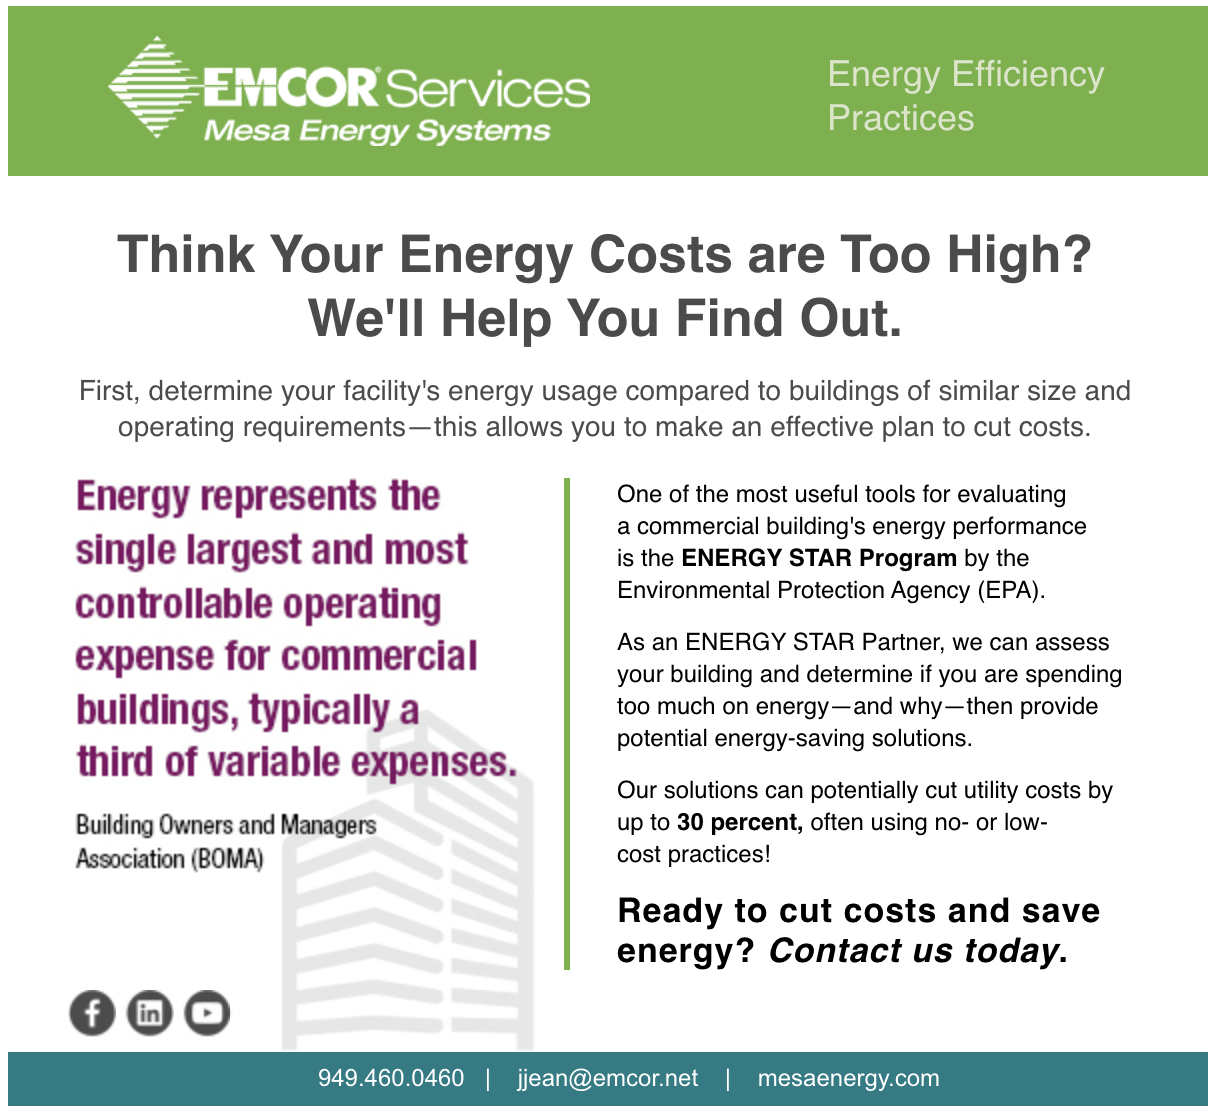 Think Your Energy Costs are Too High? We'll Help You Find Out.